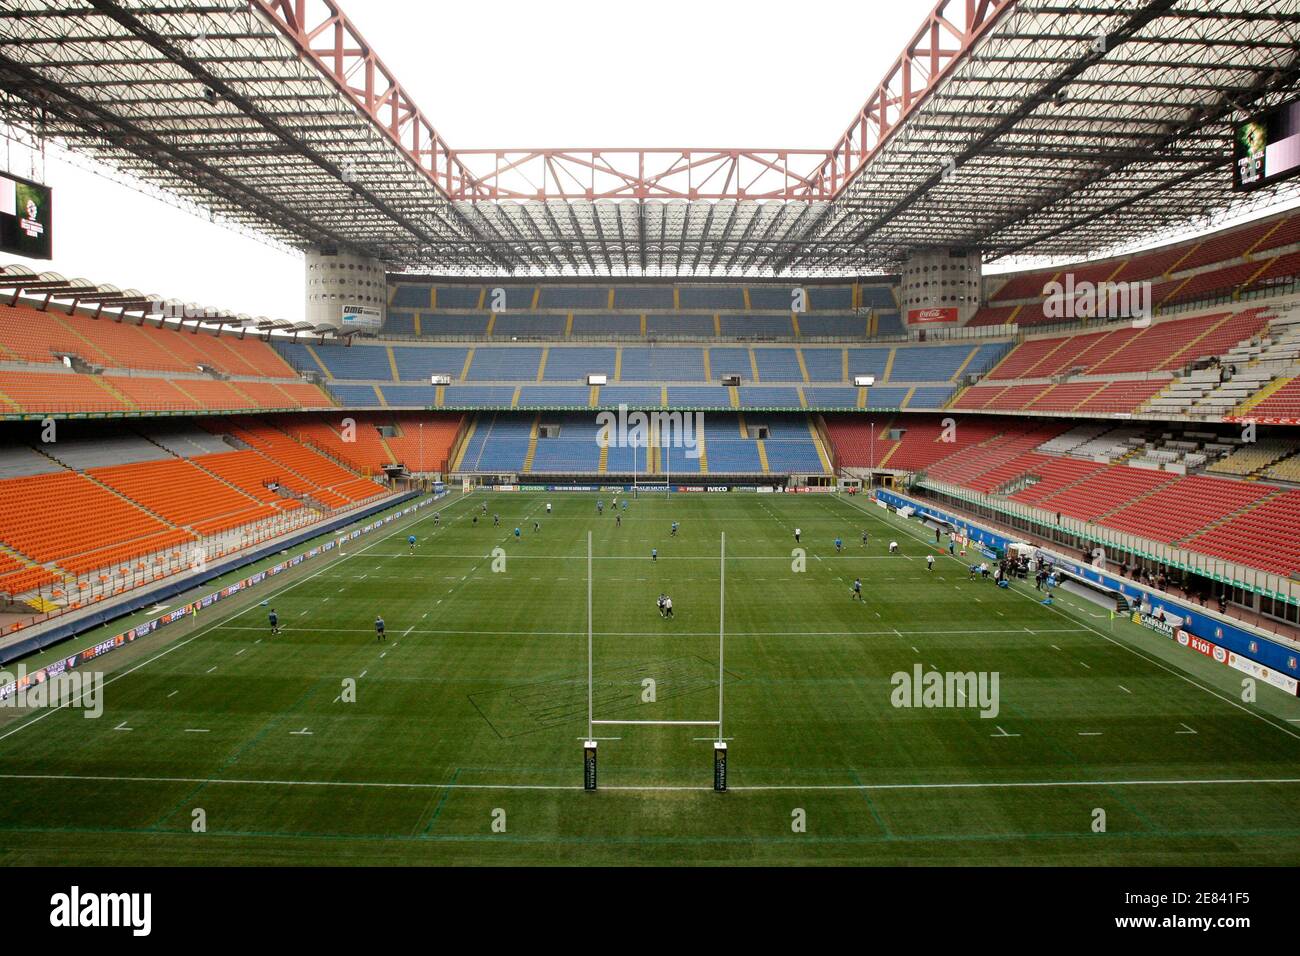 A general view shows how the San Siro stadium is set up for a rugby union  match between Italy and New Zealand in Milan November 13, 2009. Italy will  play against New